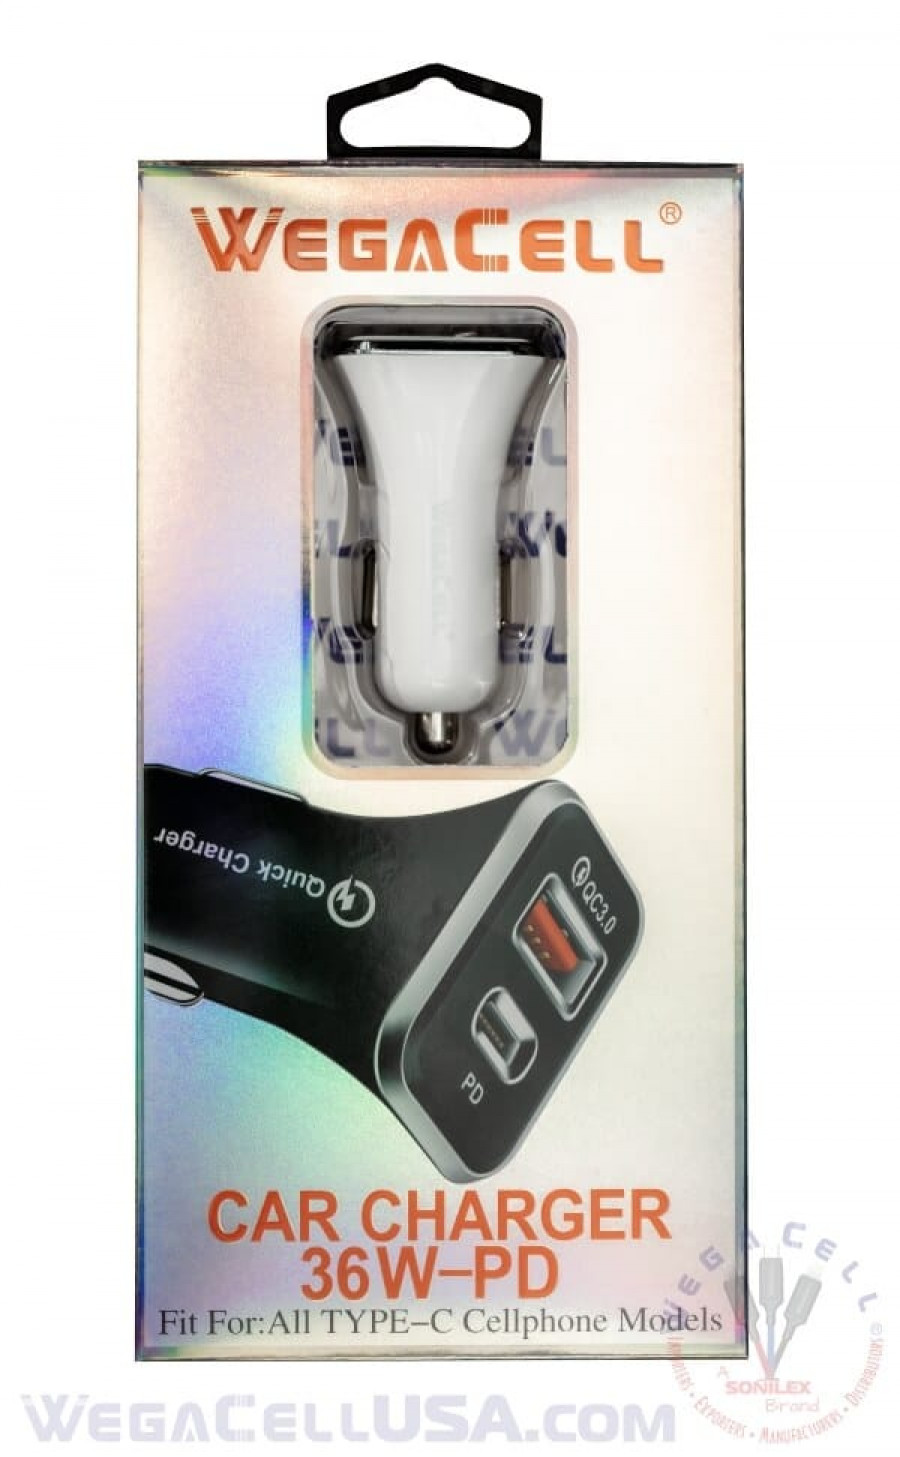 universal dual port fast charging usb - car charger - wholesale pkg wegacell: wl-80pd-dch car charger 28